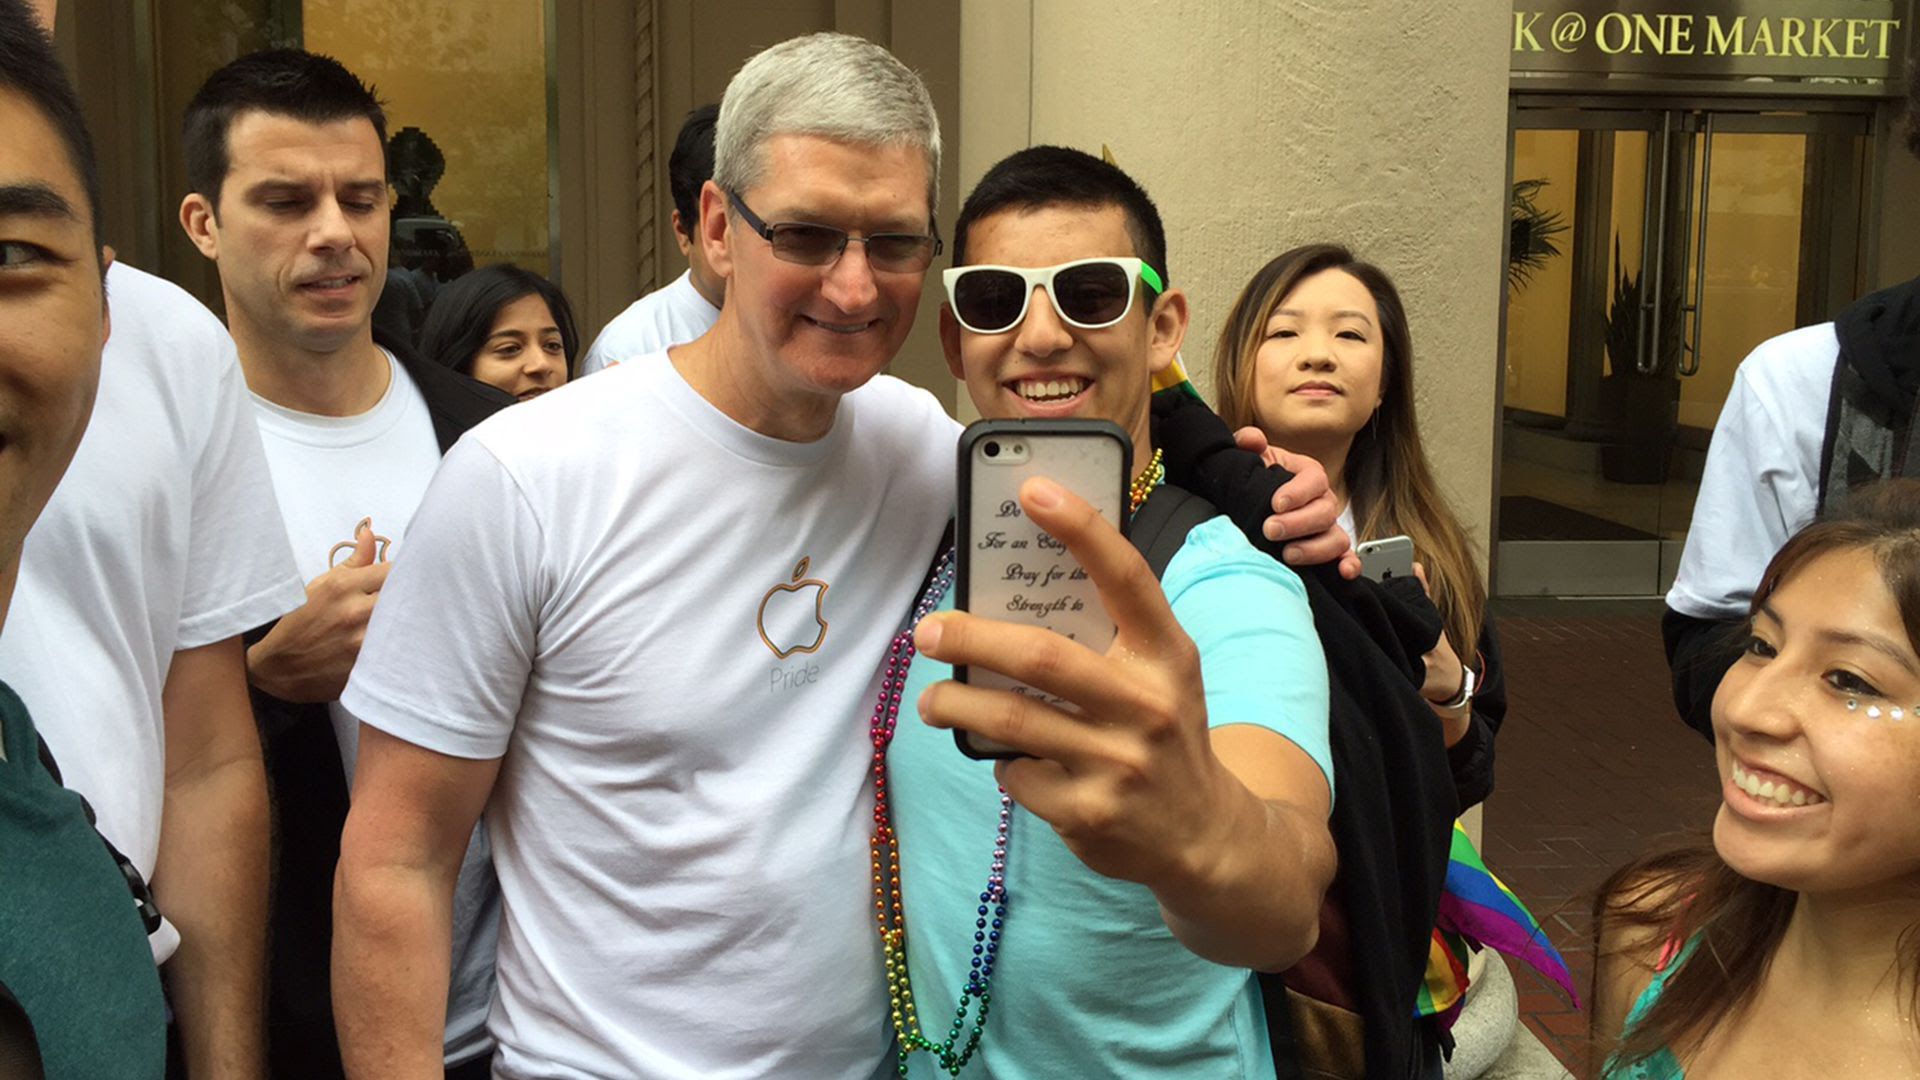 Apple CEO Tim Cook poses for a selfie with a group of teenagers